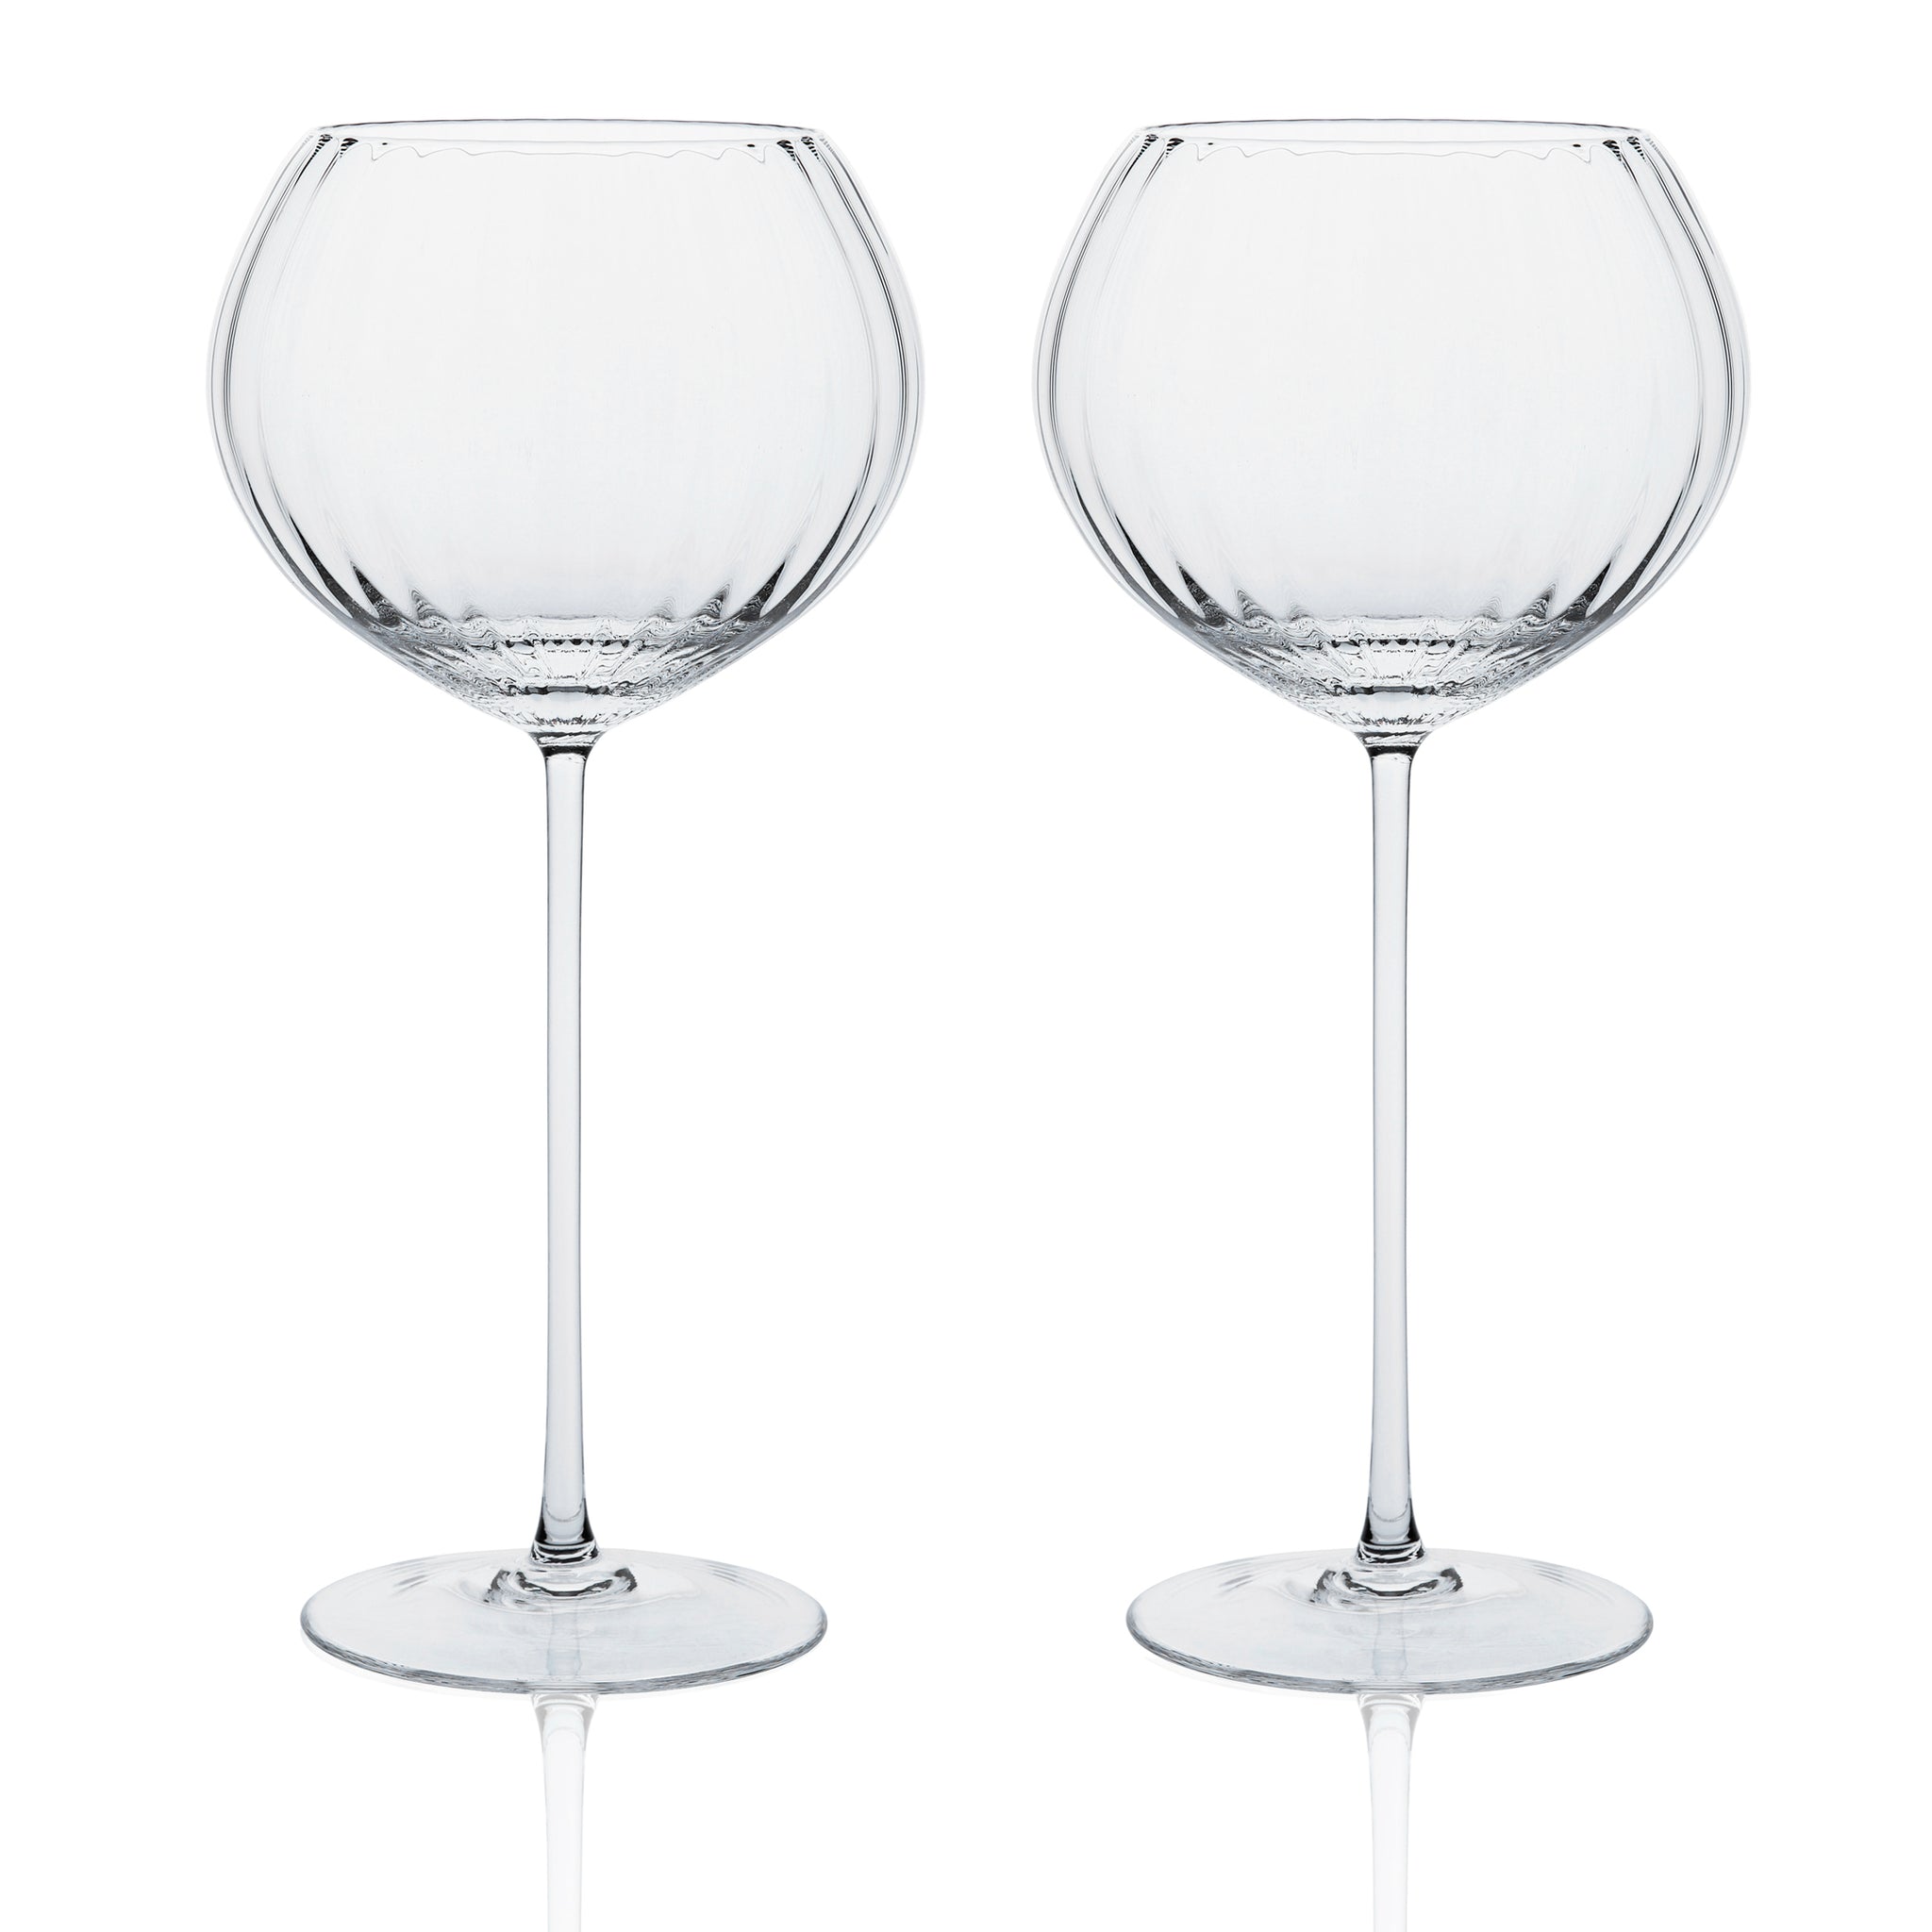 Crystal Water Glasses Set of 2, 10 oz Clear Glass